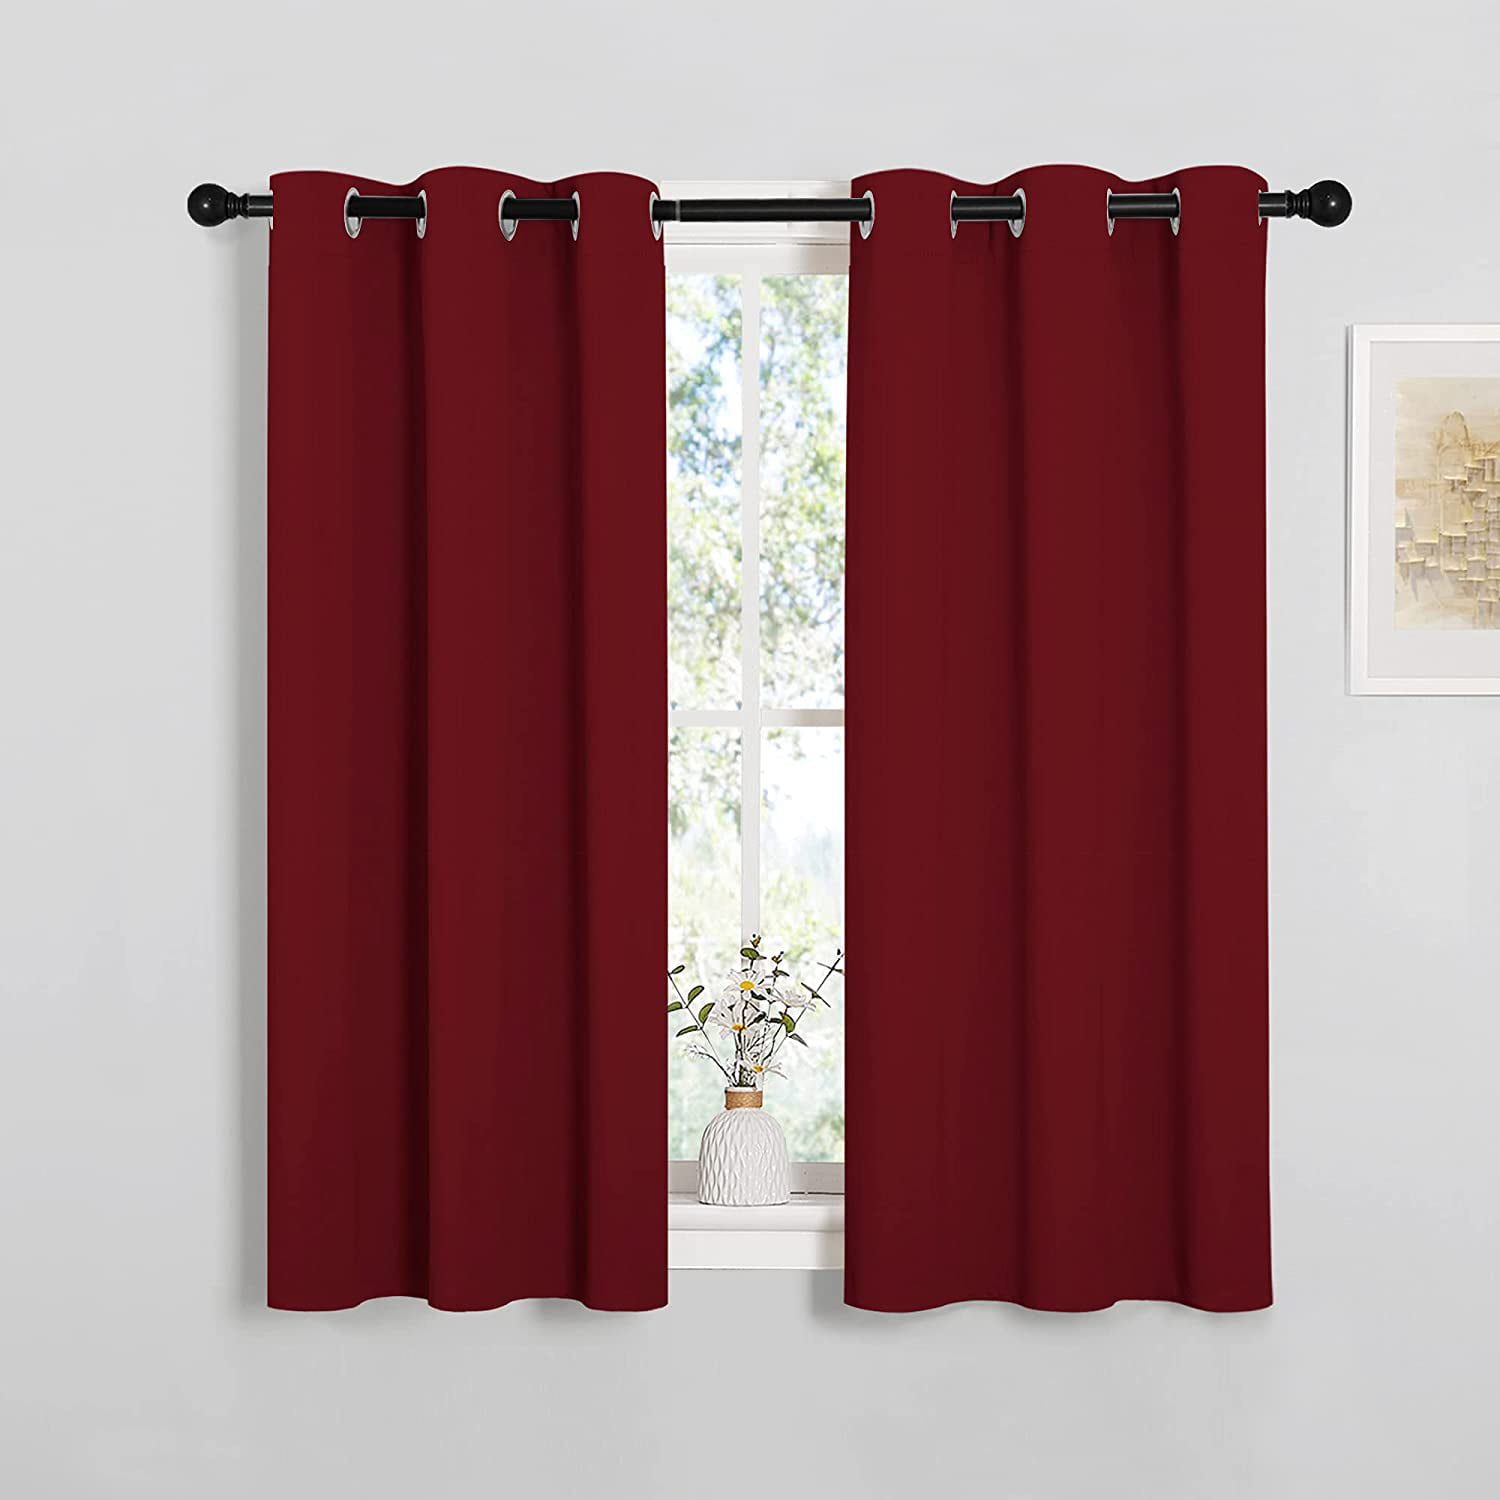 school centers. Kids Window treatment decor Solid Burgundy maroon and white hounds-tooth valance laundry room Baby 